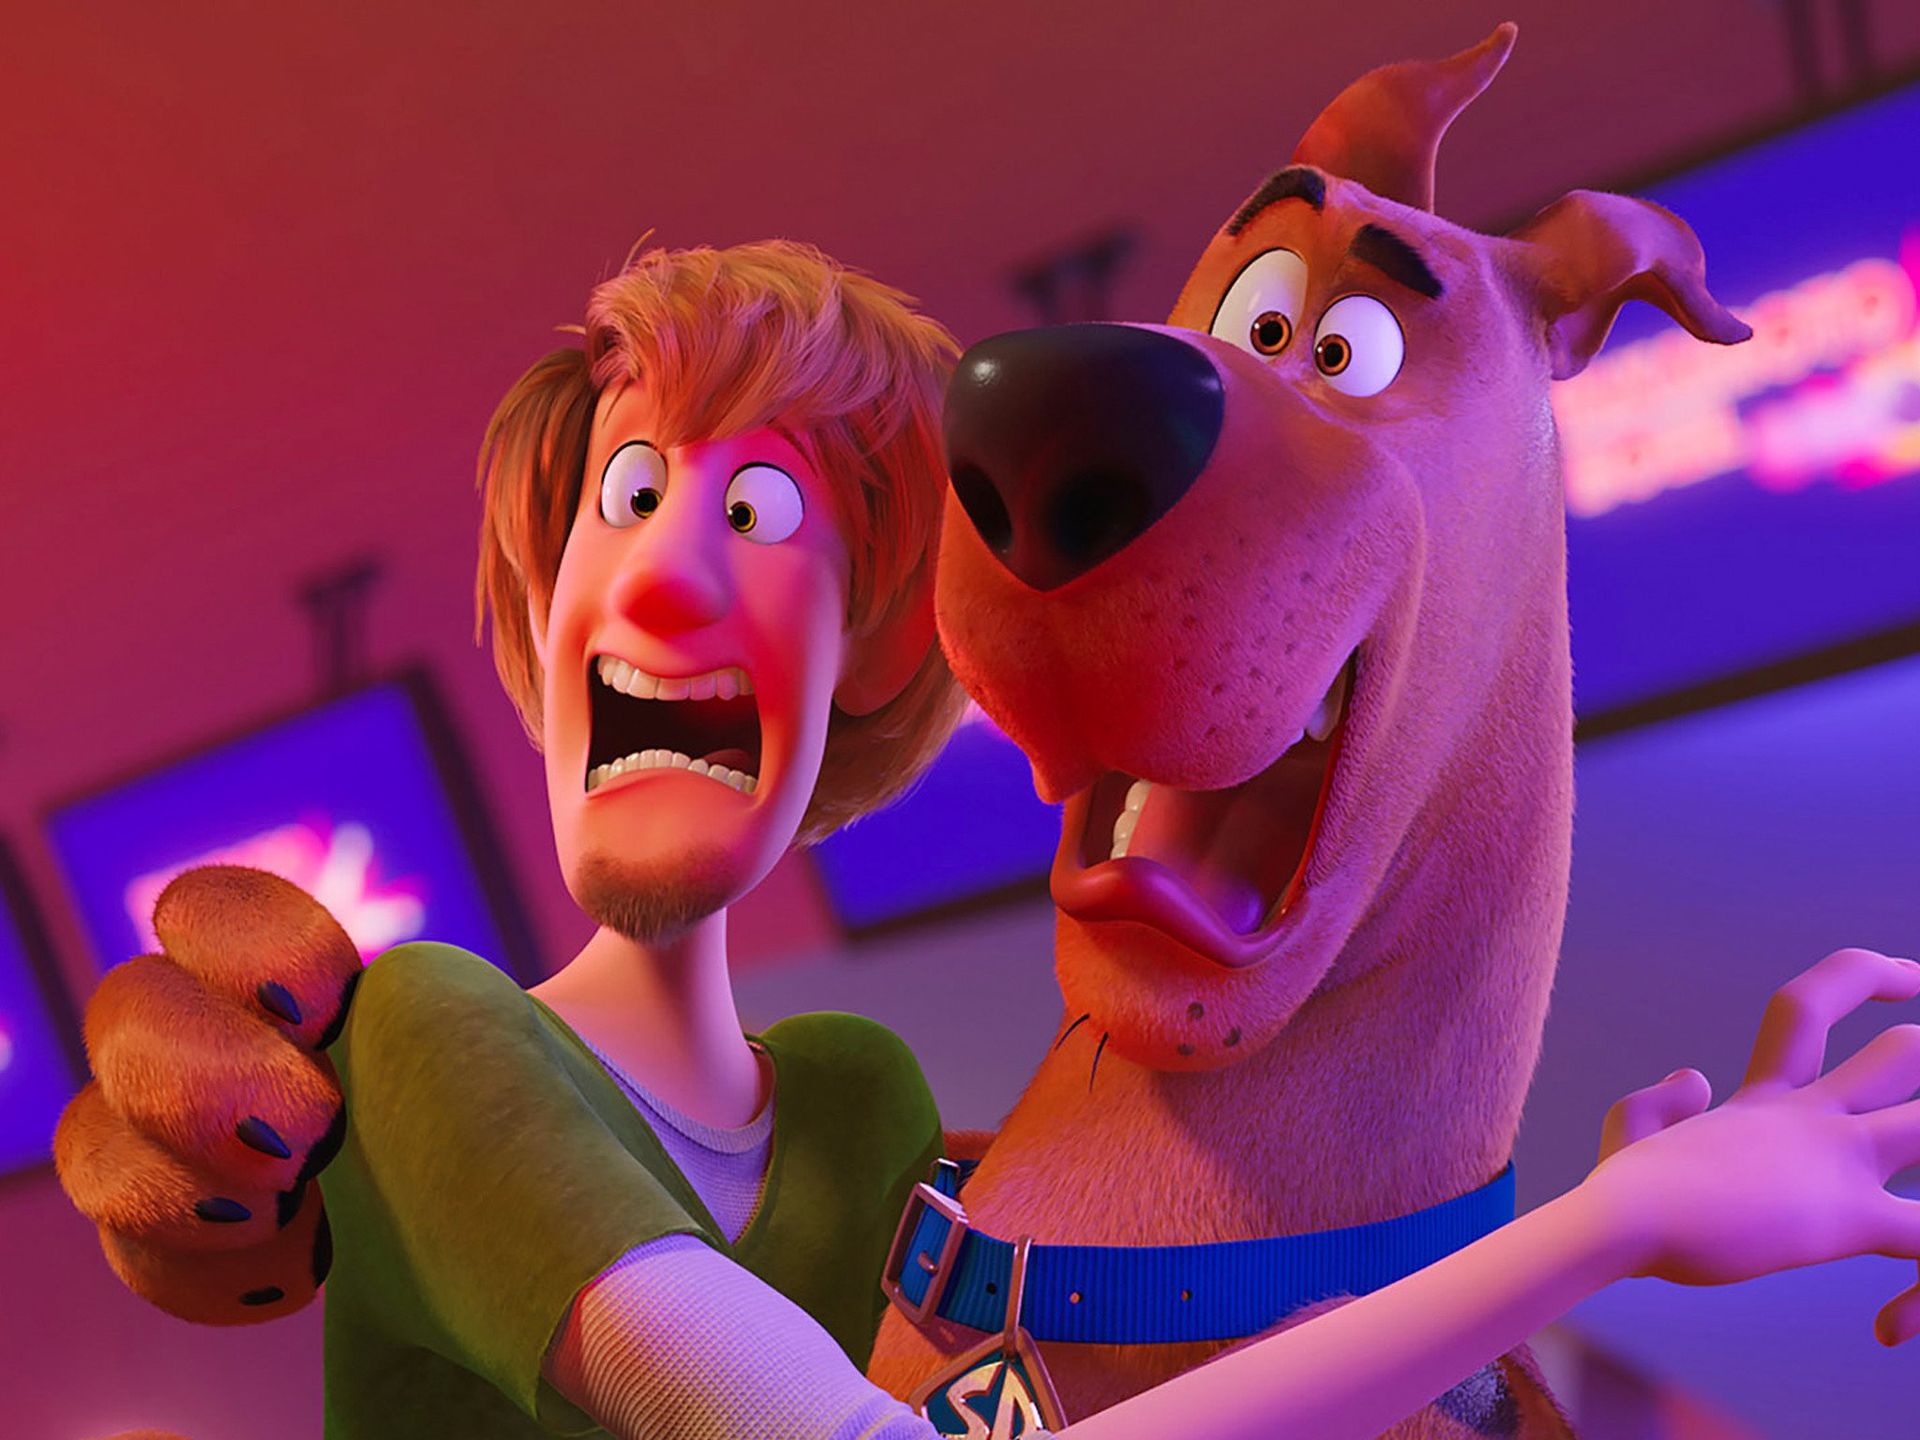 How to stream Scoob online Watch the new ScoobyDoo movie right now